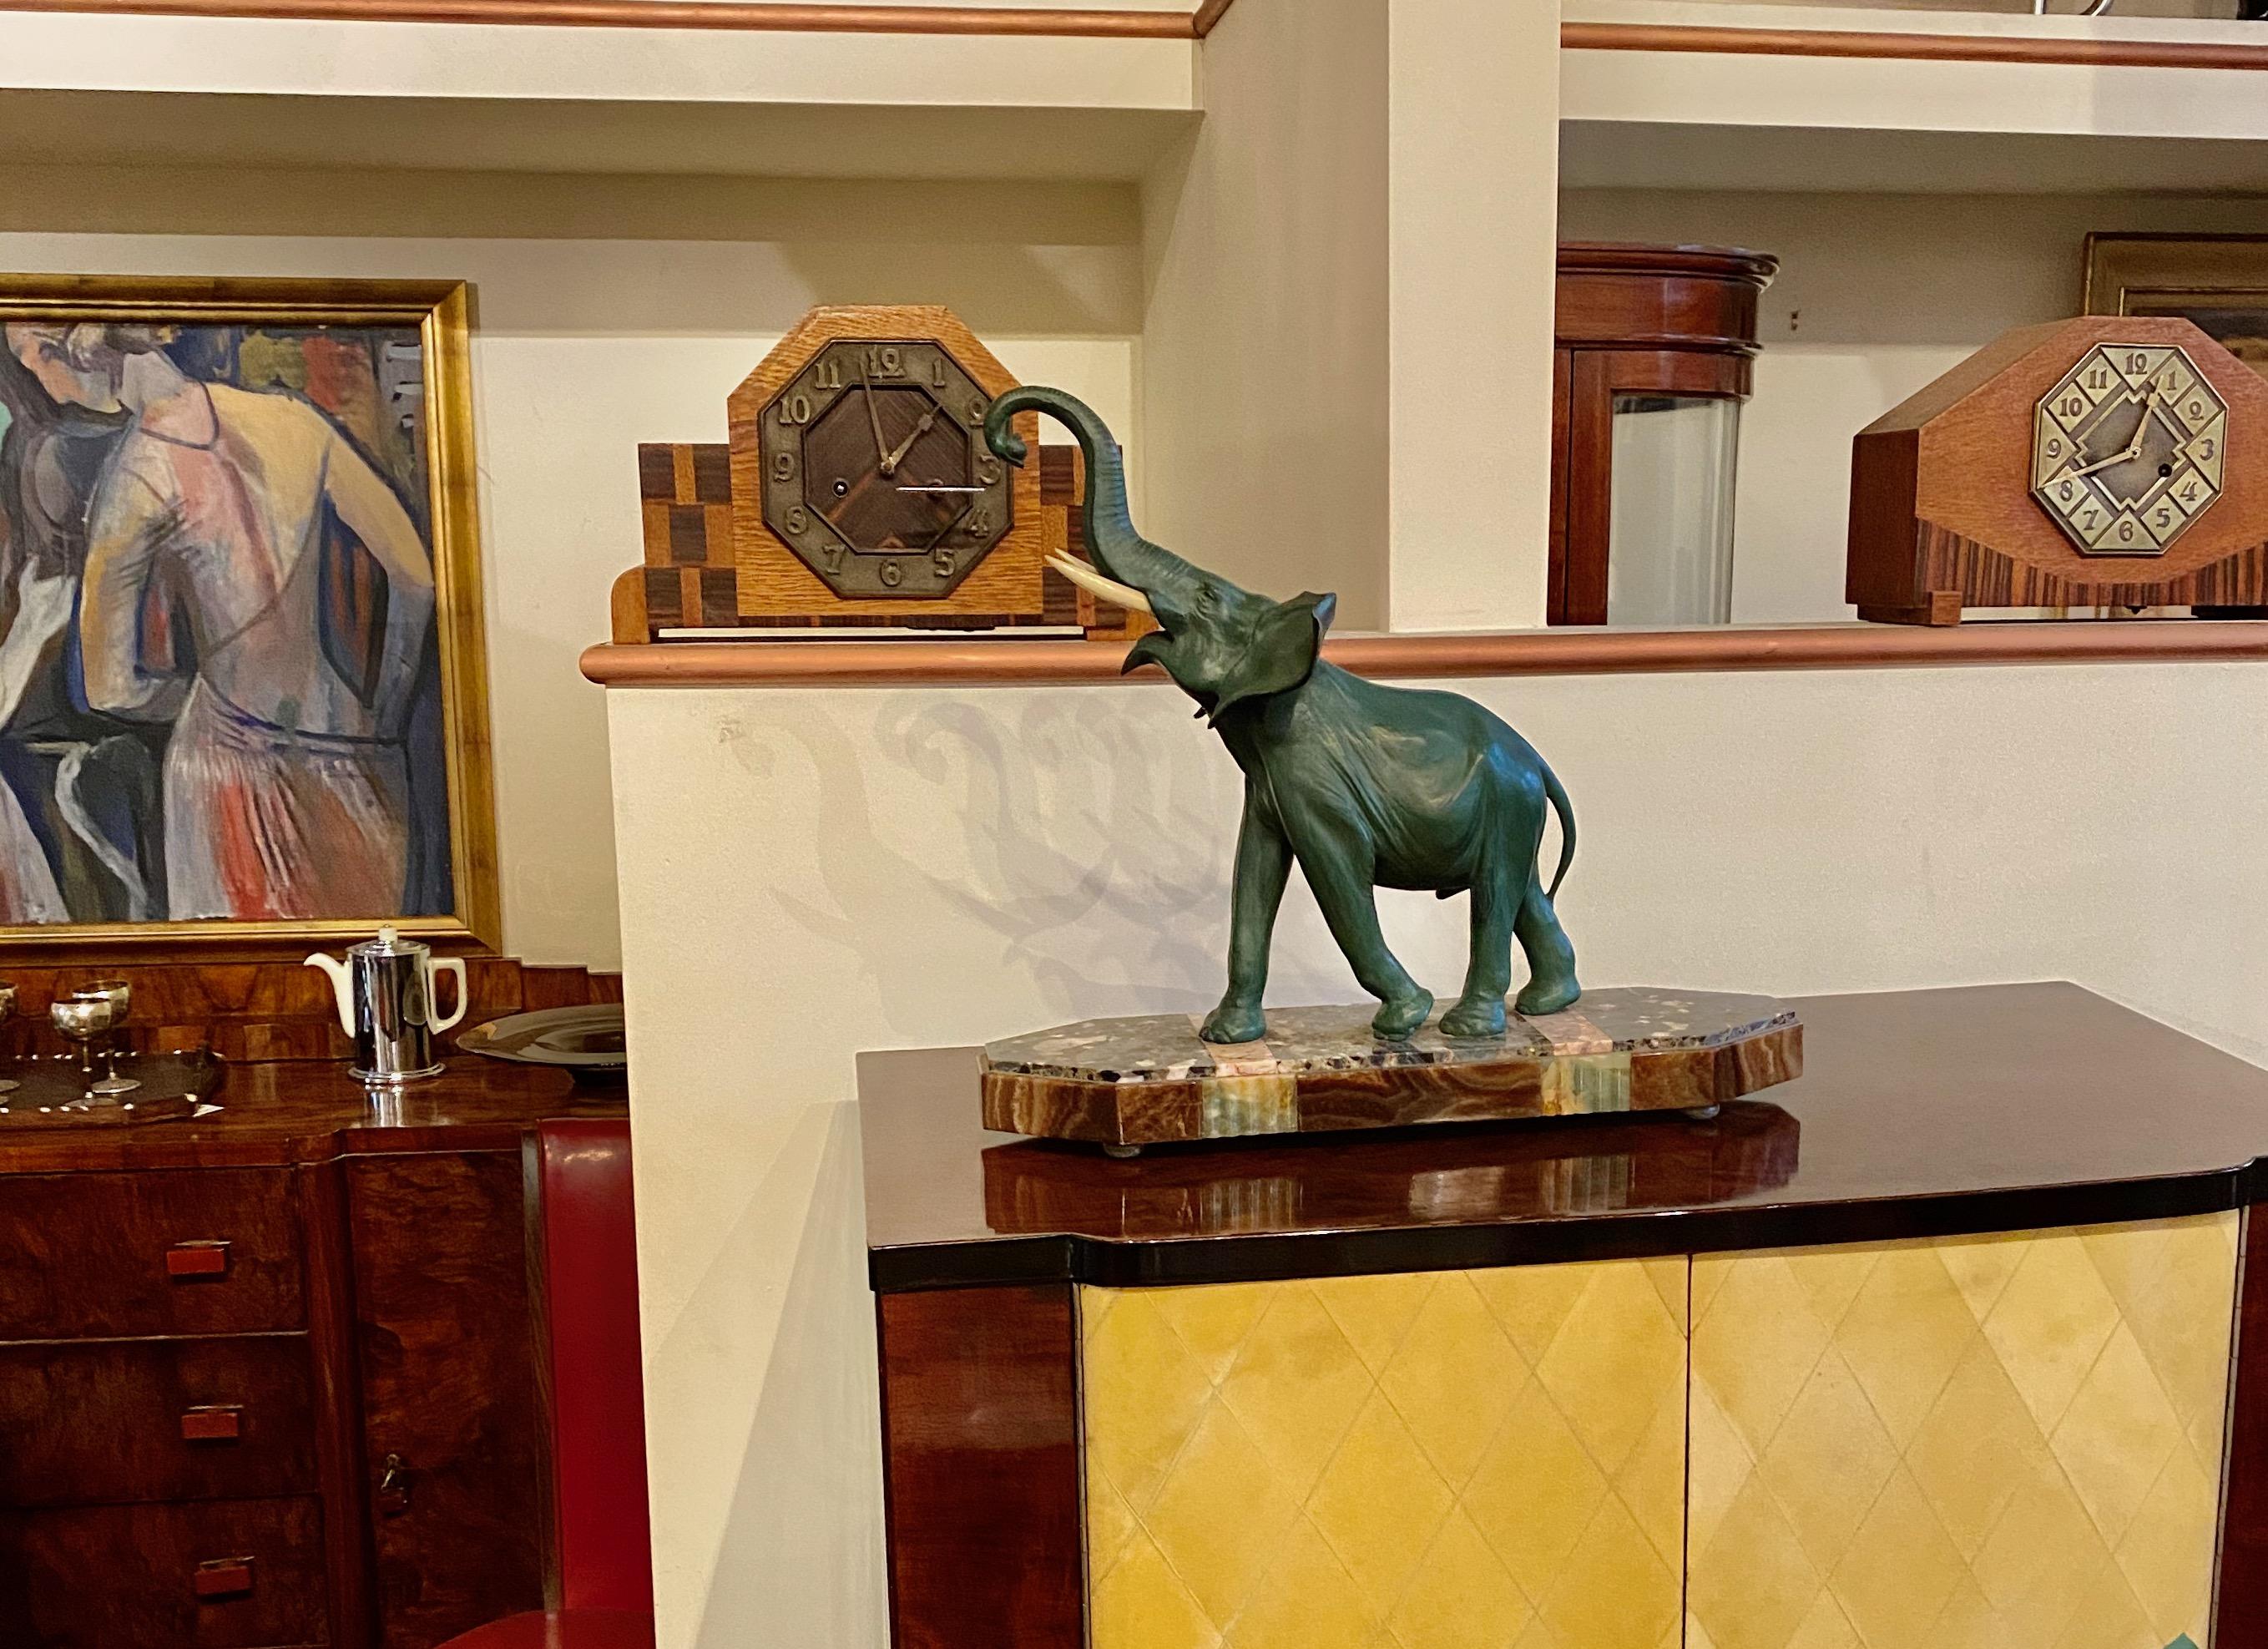 Art Deco elephant sculpture on marble stylized base. Spelter metal with ivoroid ( synthetic) tusks, in the lucky position of going upward. This is a great piece, showing style and movement, the best way to preserve the beauty of these magnificent